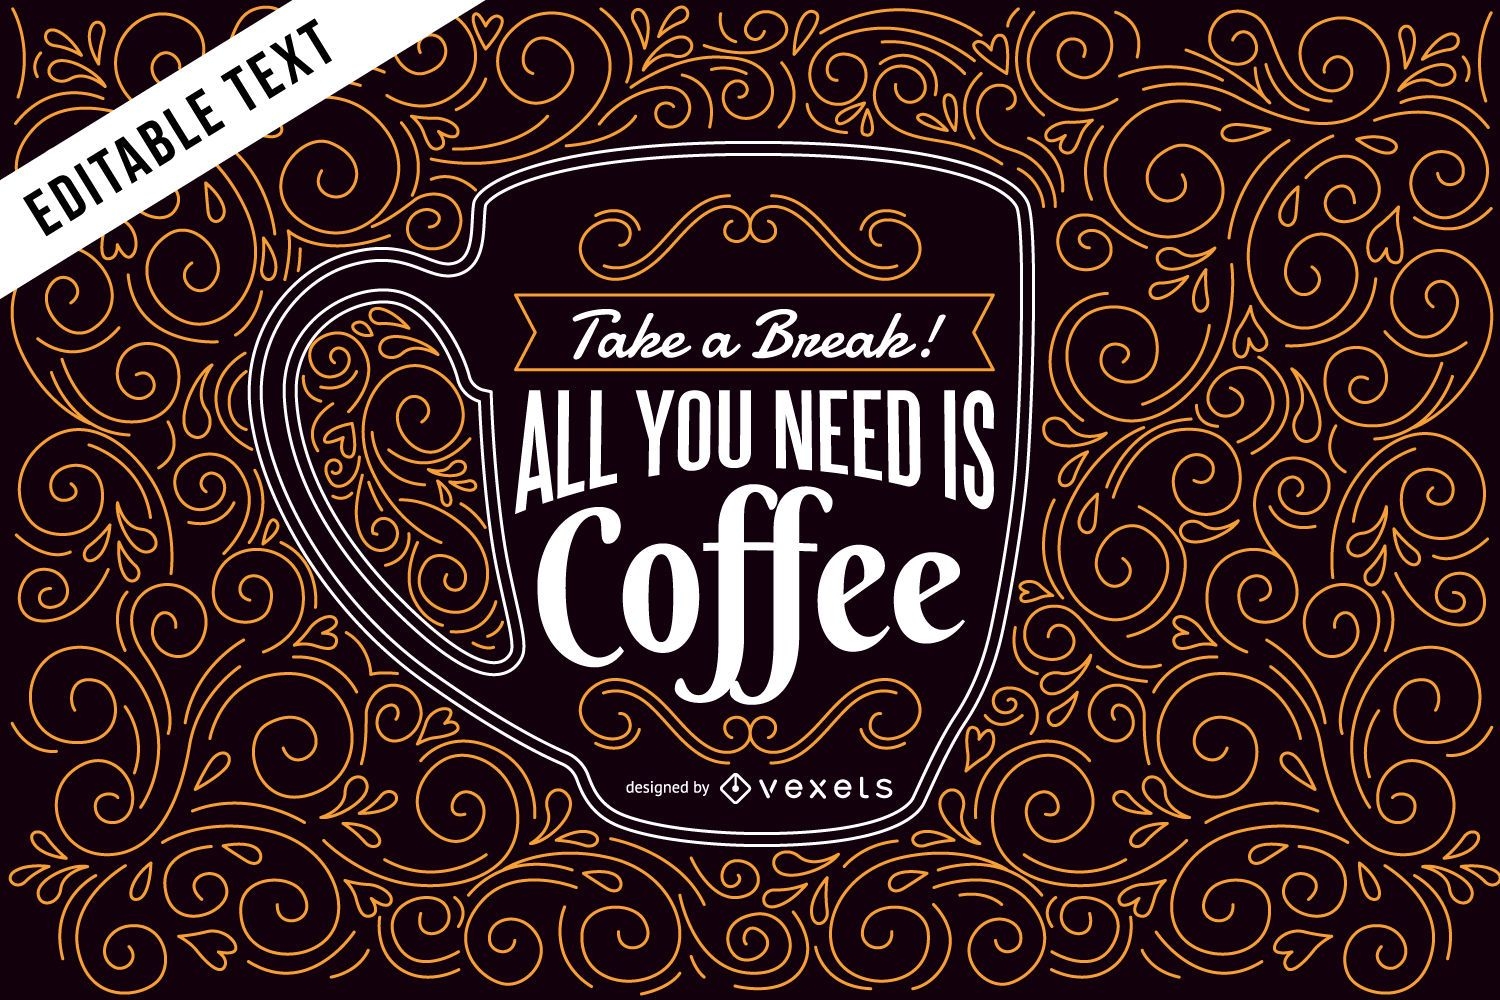 Coffee illustration with lettering and swirls